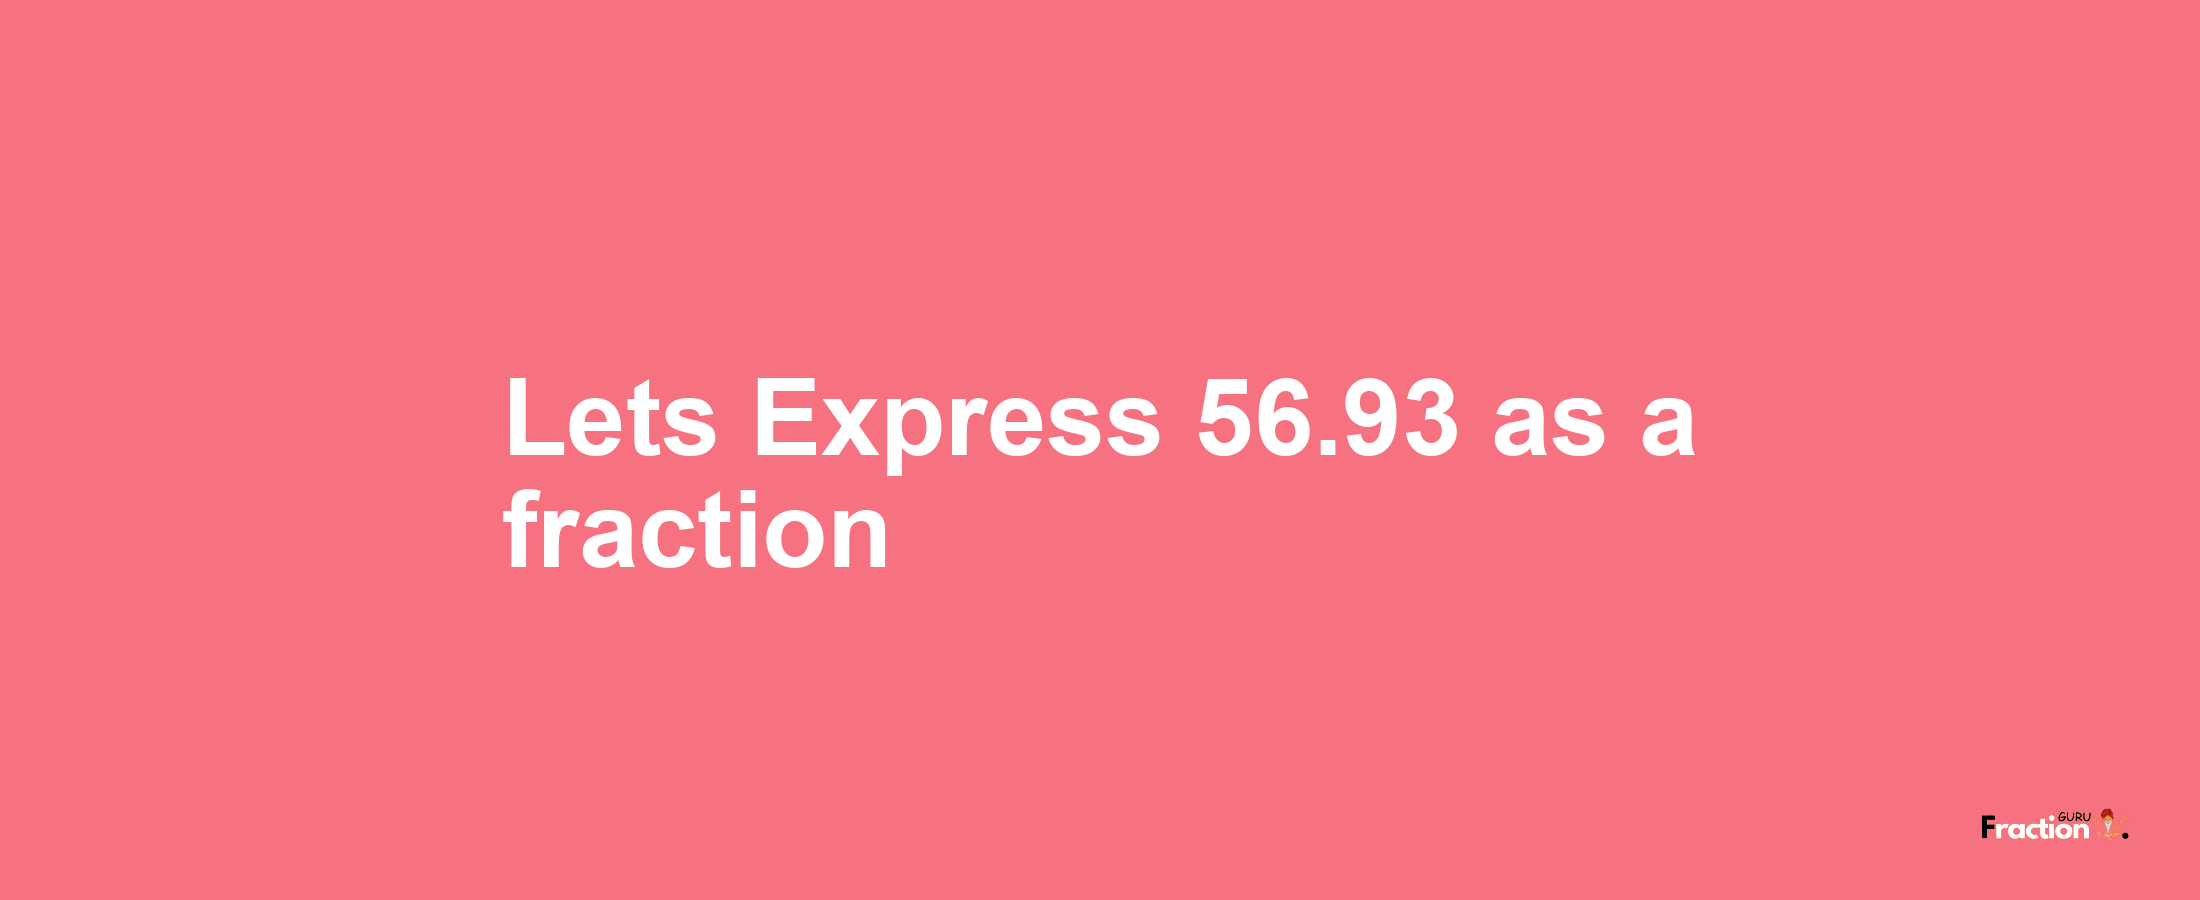 Lets Express 56.93 as afraction